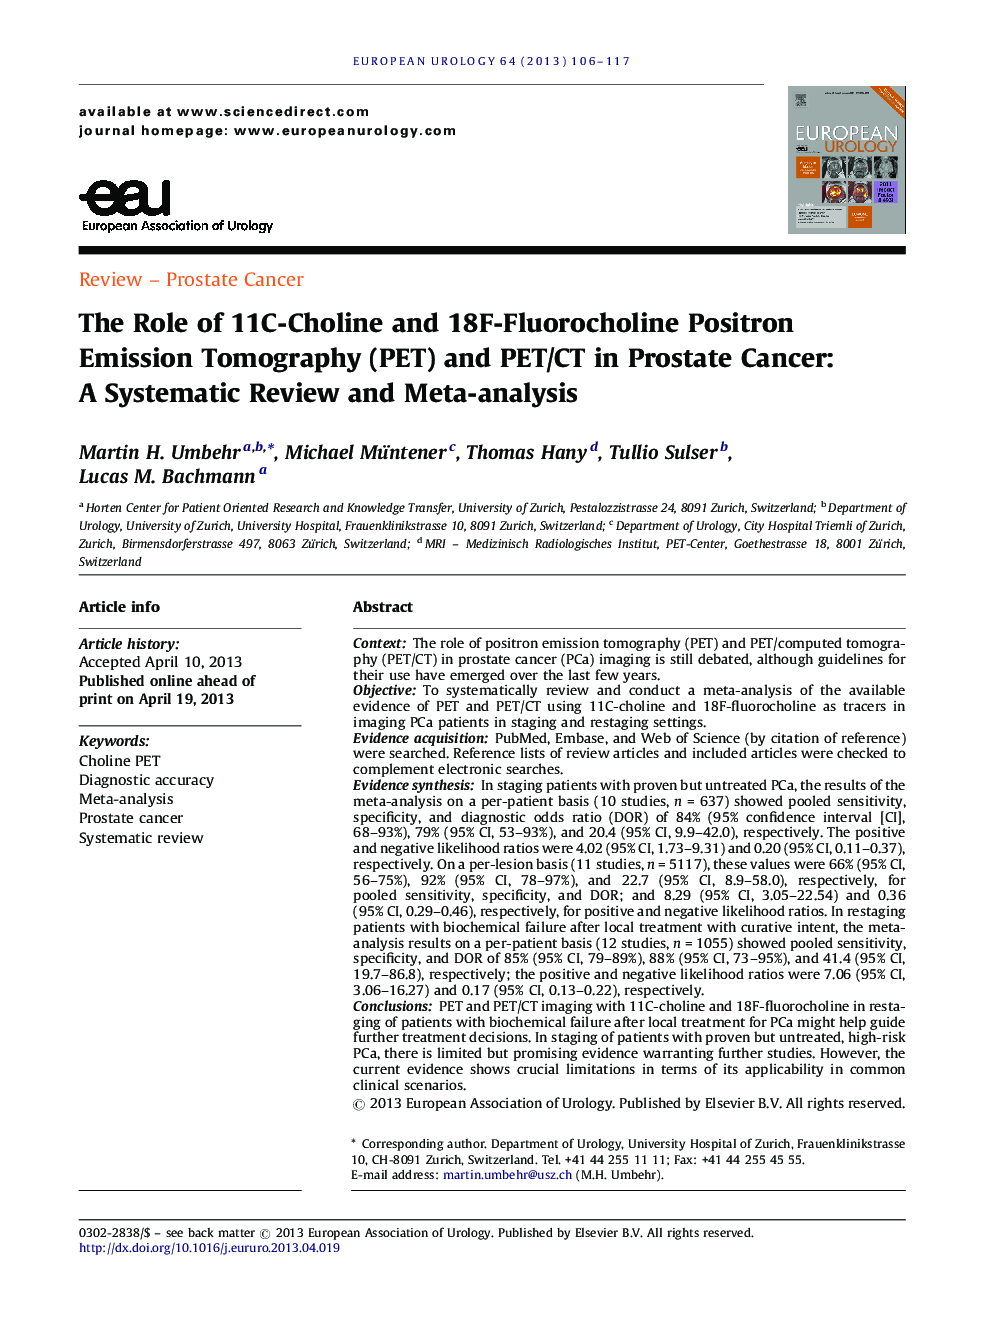 The Role of 11C-Choline and 18F-Fluorocholine Positron Emission Tomography (PET) and PET/CT in Prostate Cancer: A Systematic Review and Meta-analysis